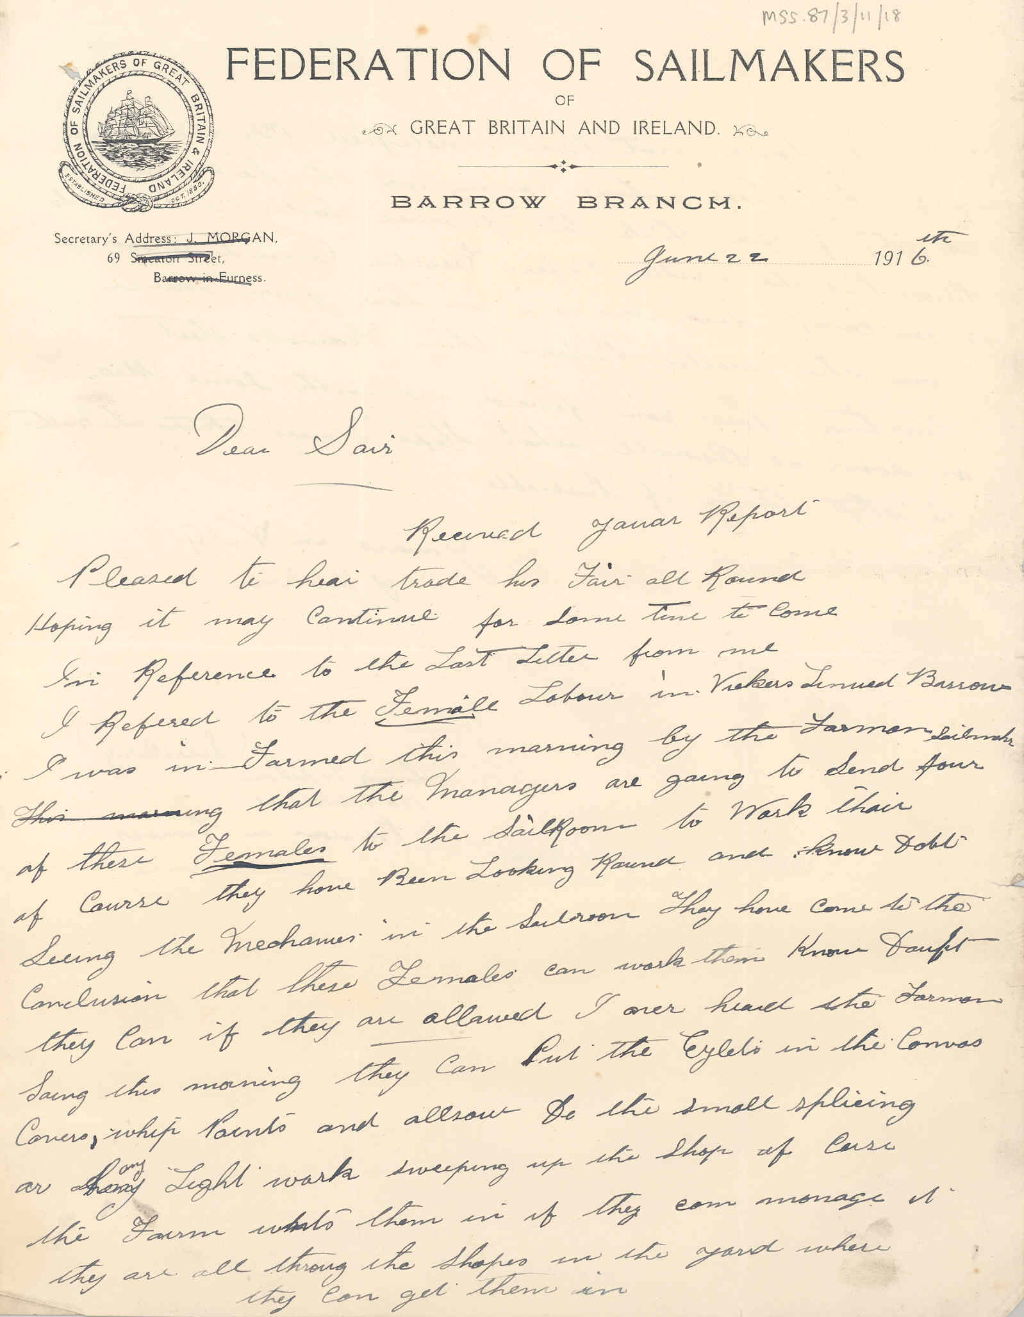 Letter from the Barrow branch of the Federation of Sailmakers, 22 June 1916